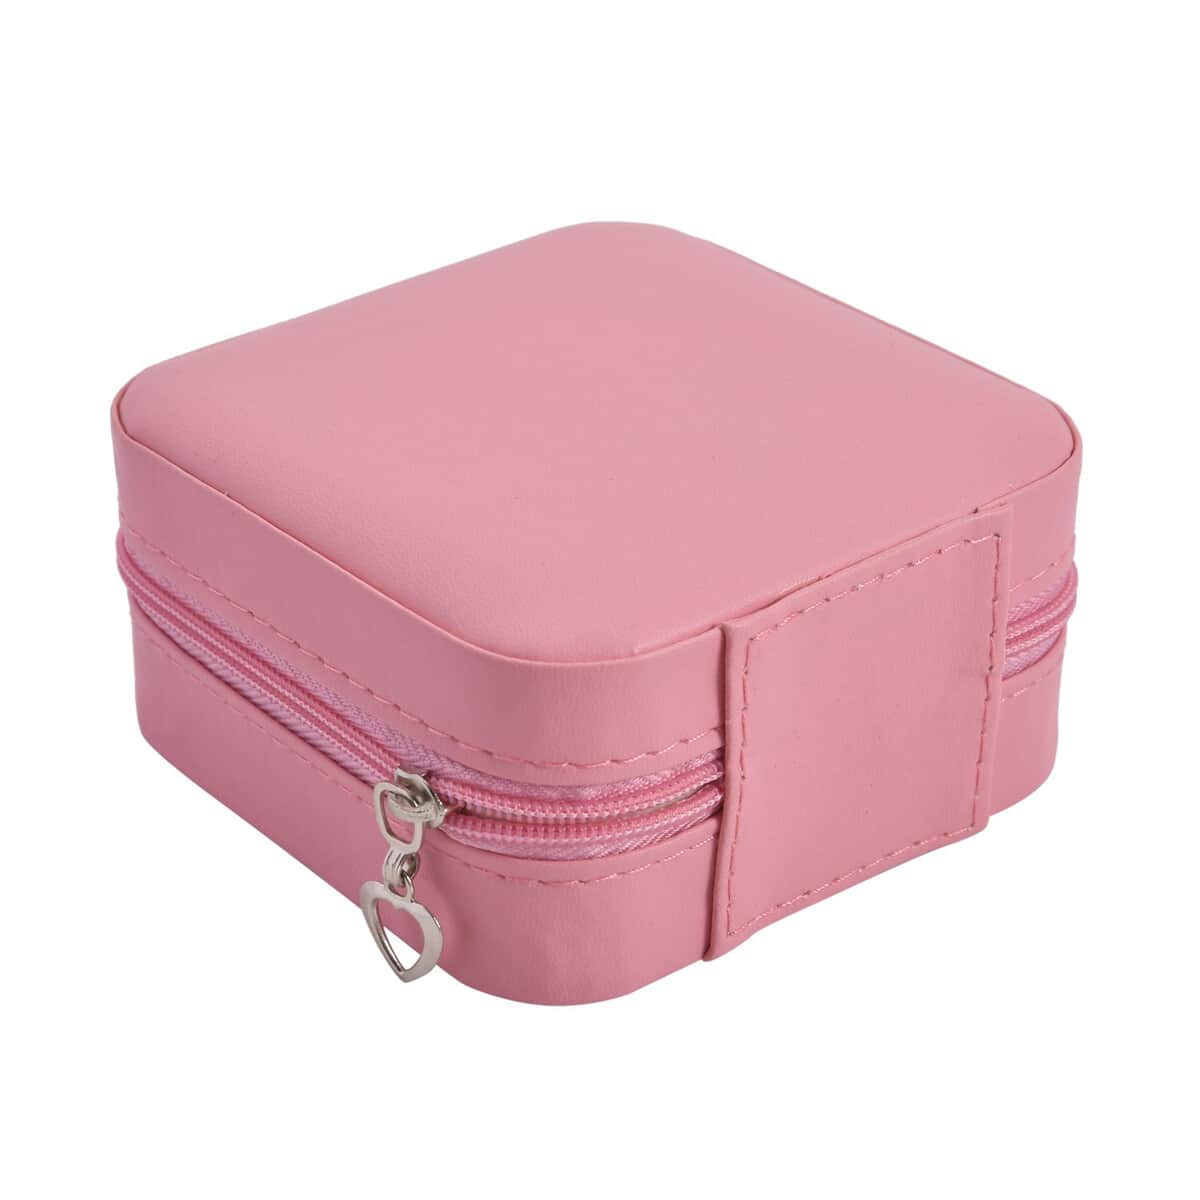 Pink Faux Leather Travel Jewelry Organizer with Zipper (3.94"x3.94"x1.97") image number 4